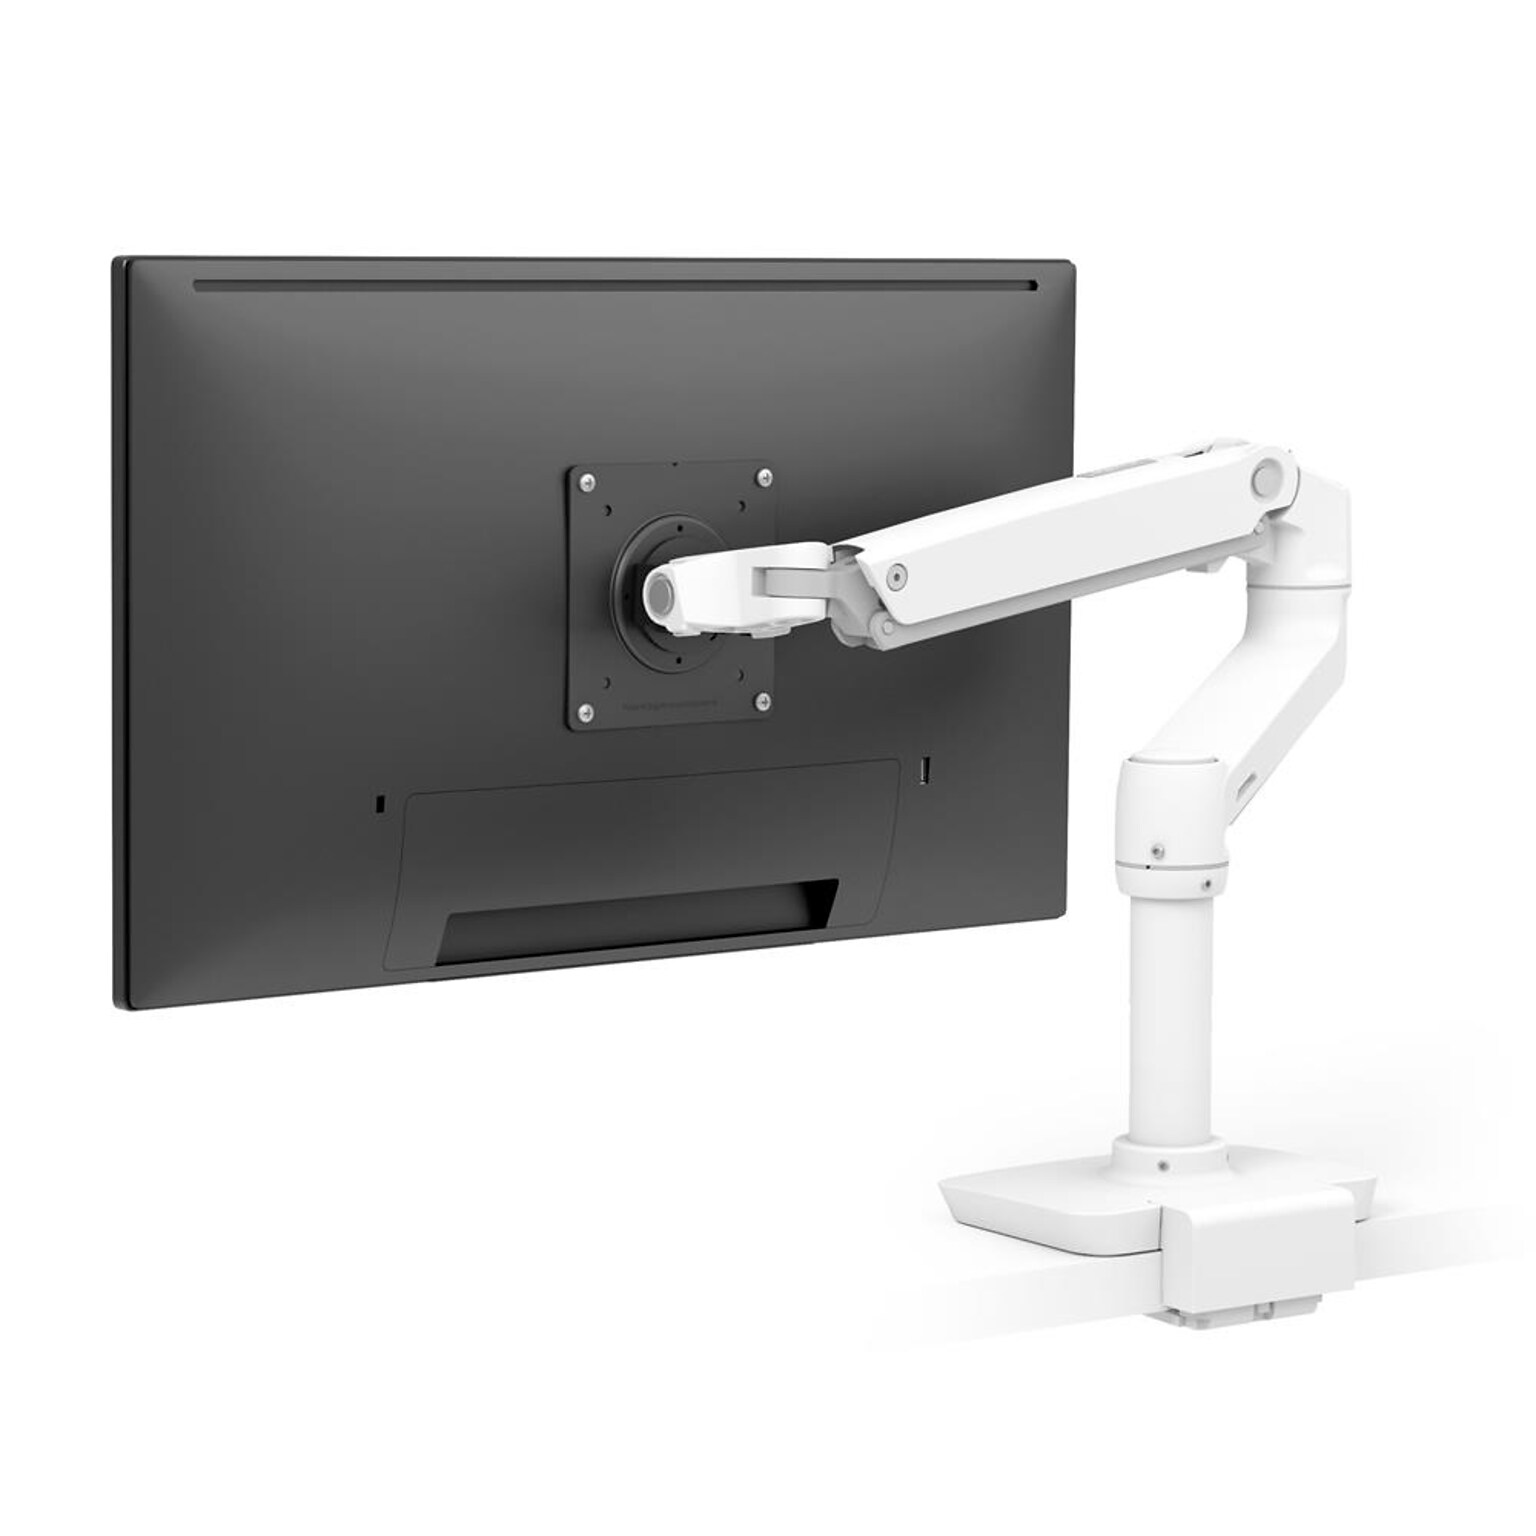 Ergotron LX Desk Adjustable Single Arm with Low-Profile Clamp, 34 Screen Support, White (45-626-216)